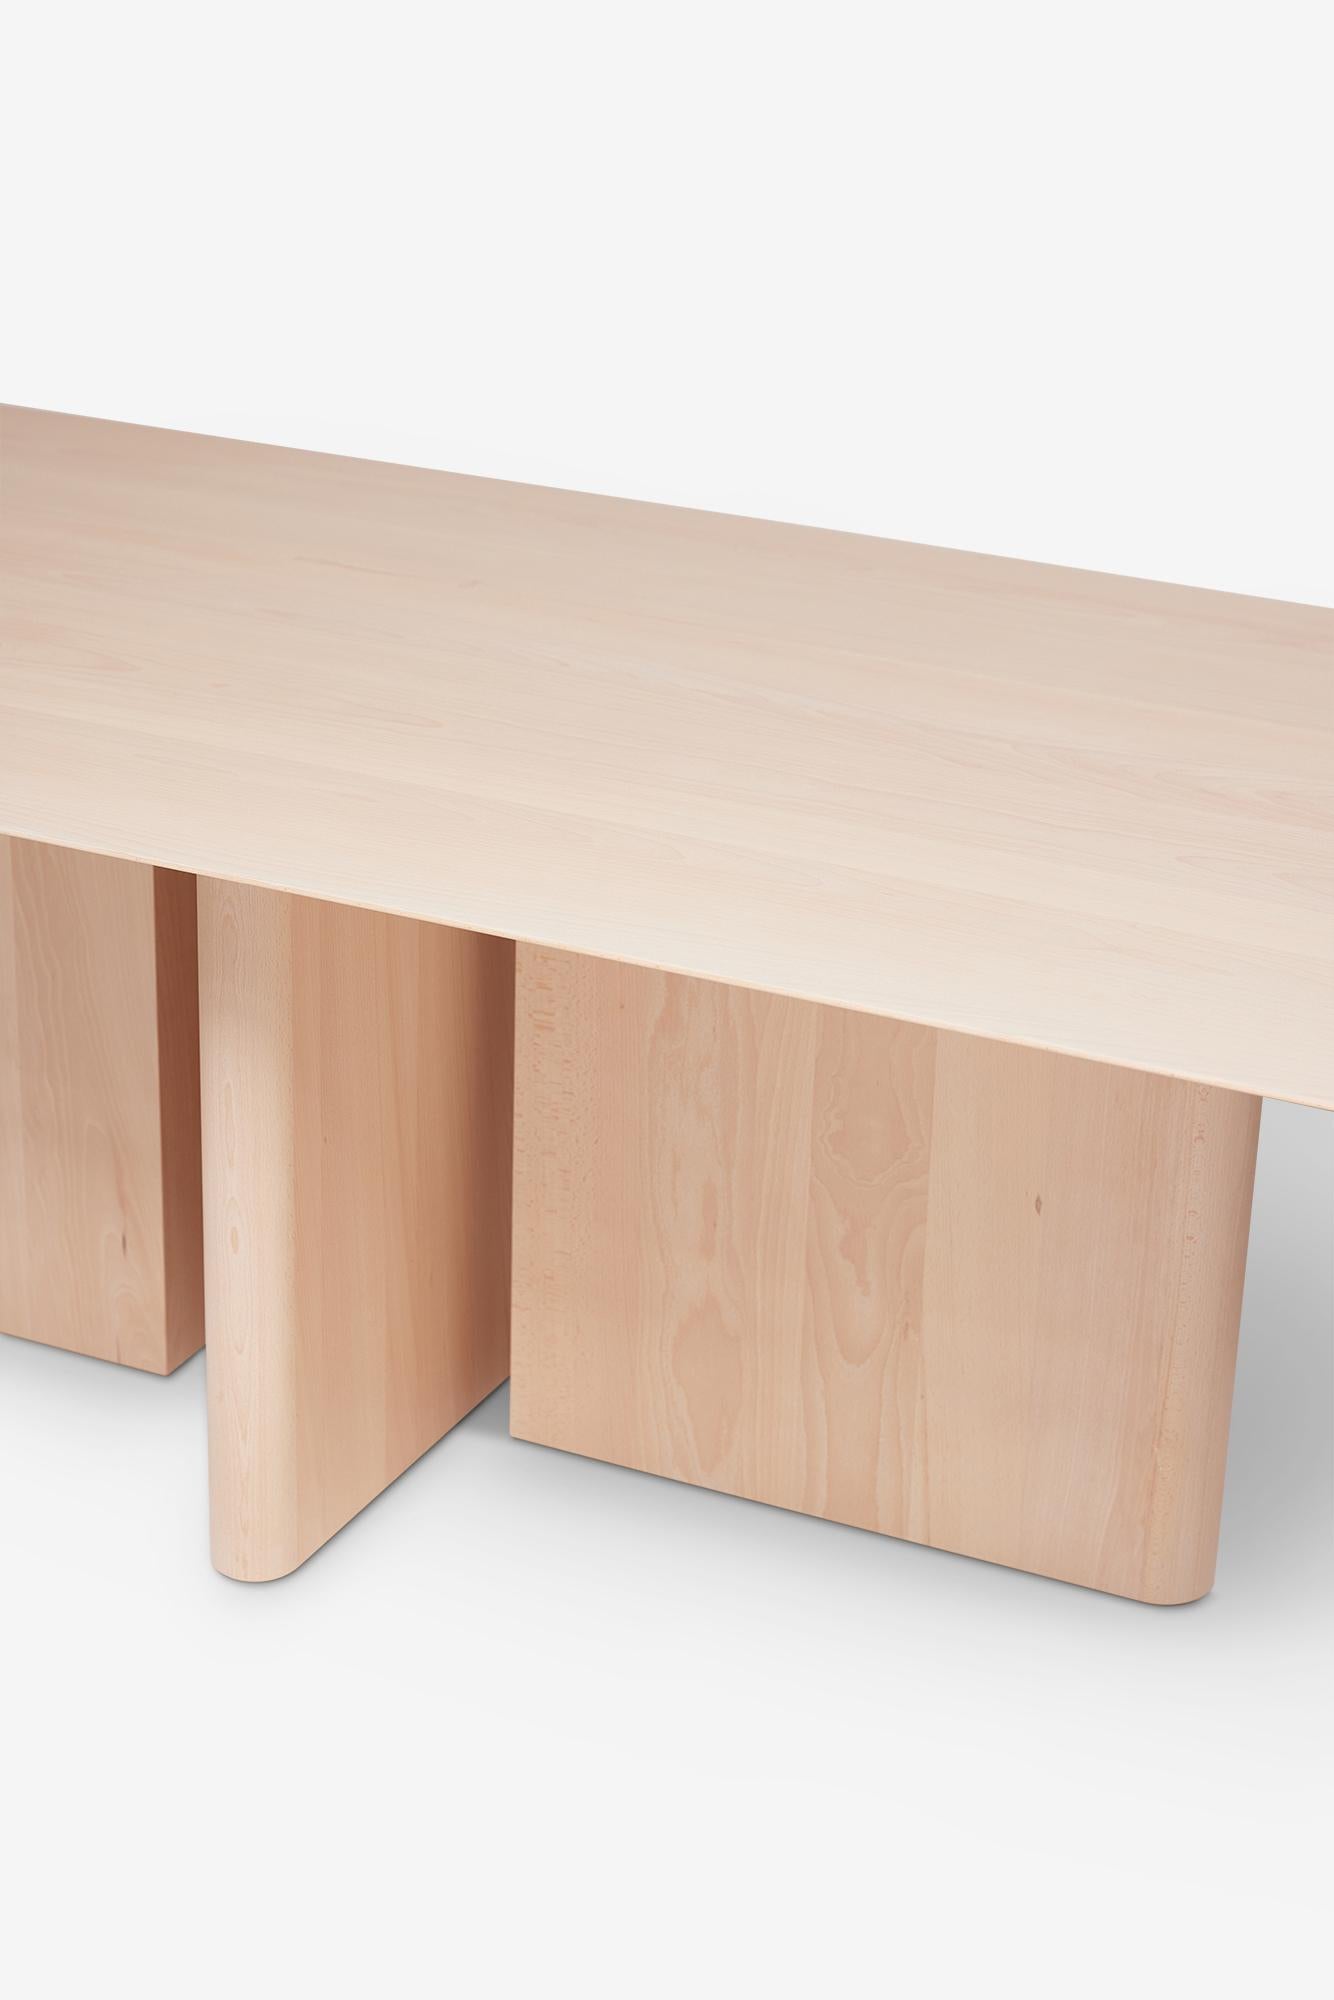 MG210 Dining Table in Danish beech by Malte Gormsen design by Norm Architects In New Condition For Sale In Copenhagen, DK